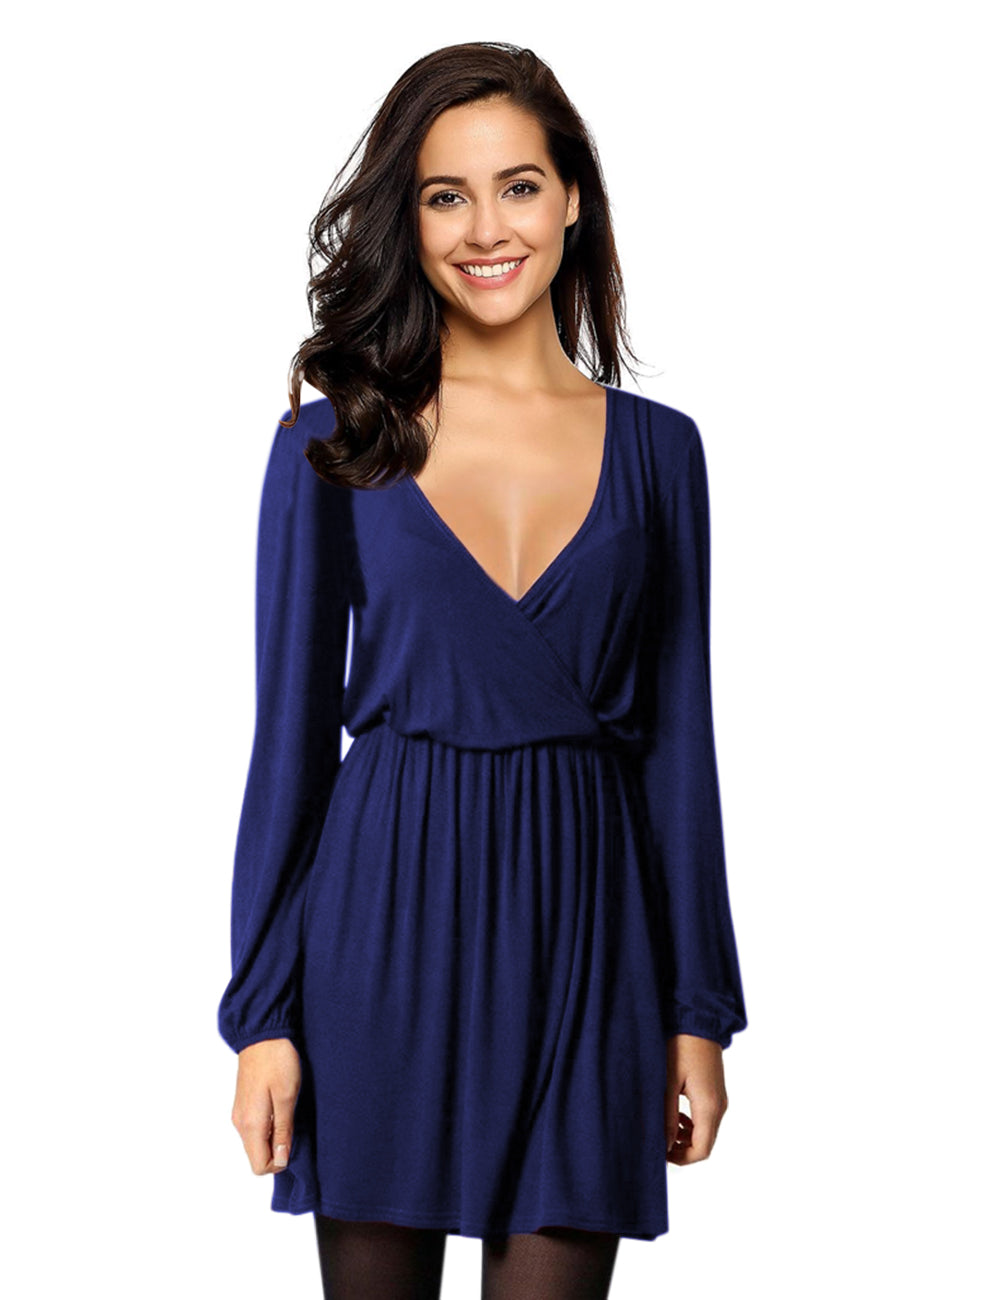 YESFASHION Women V-Neck A-Line Solid Plain Party Casual Mini Dress Navy Blue